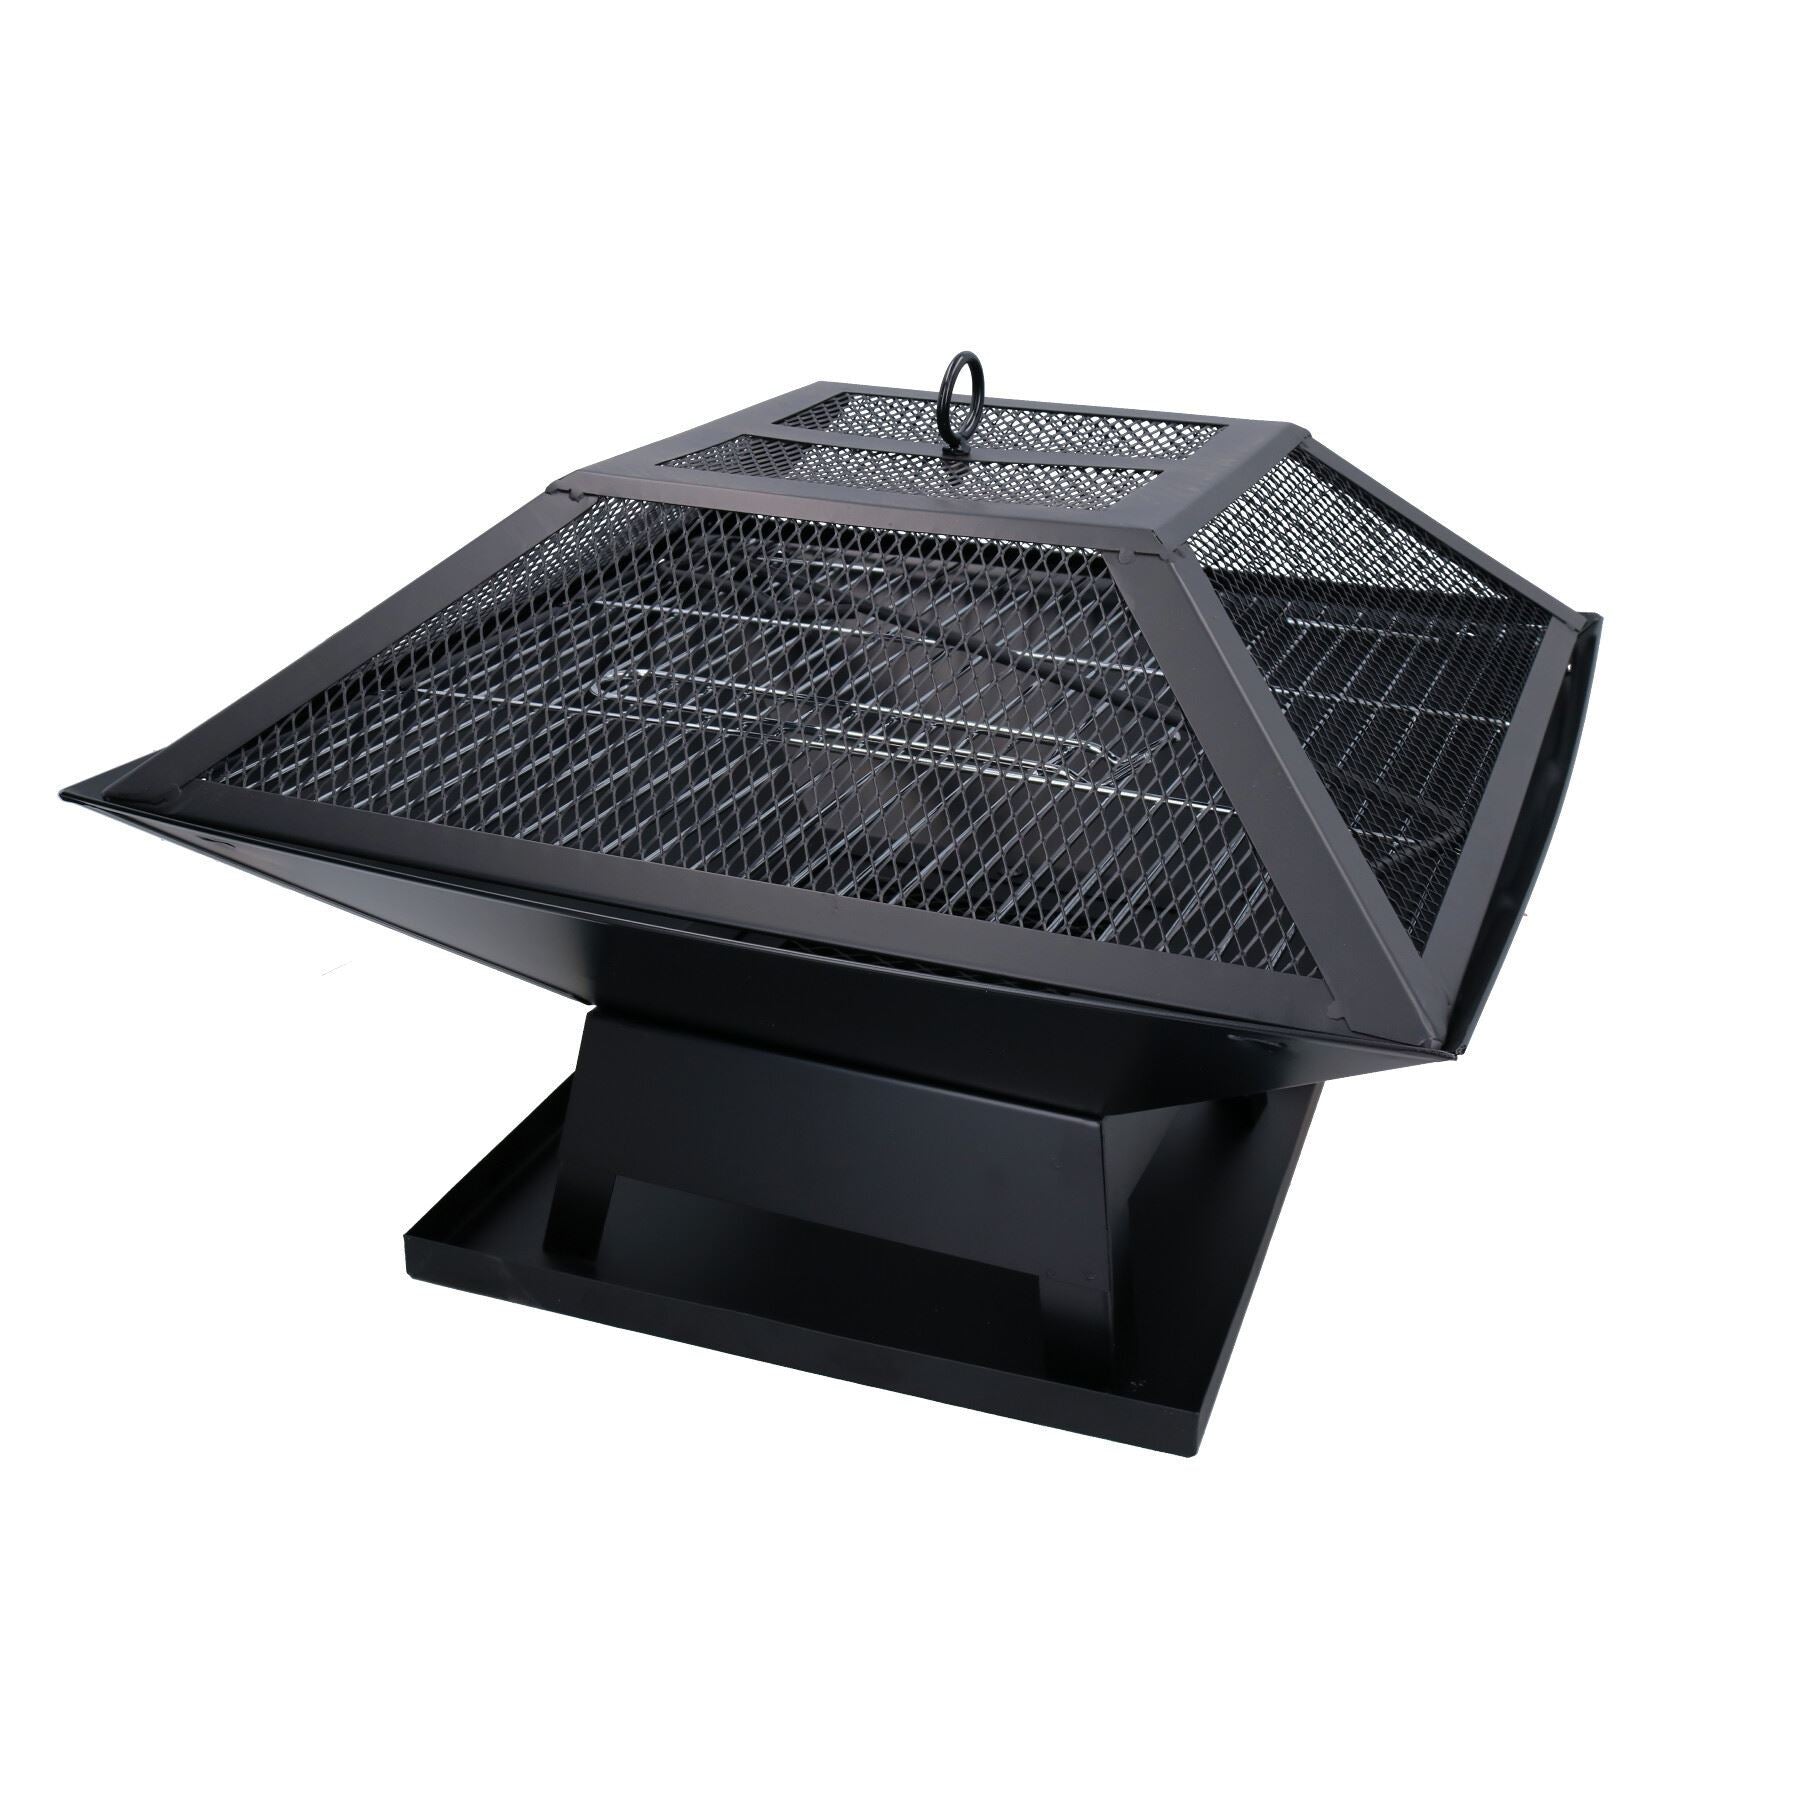 Authentic Flame Grill Barbecue Griddle Fire Pit Patio Heater Brazier BBQ